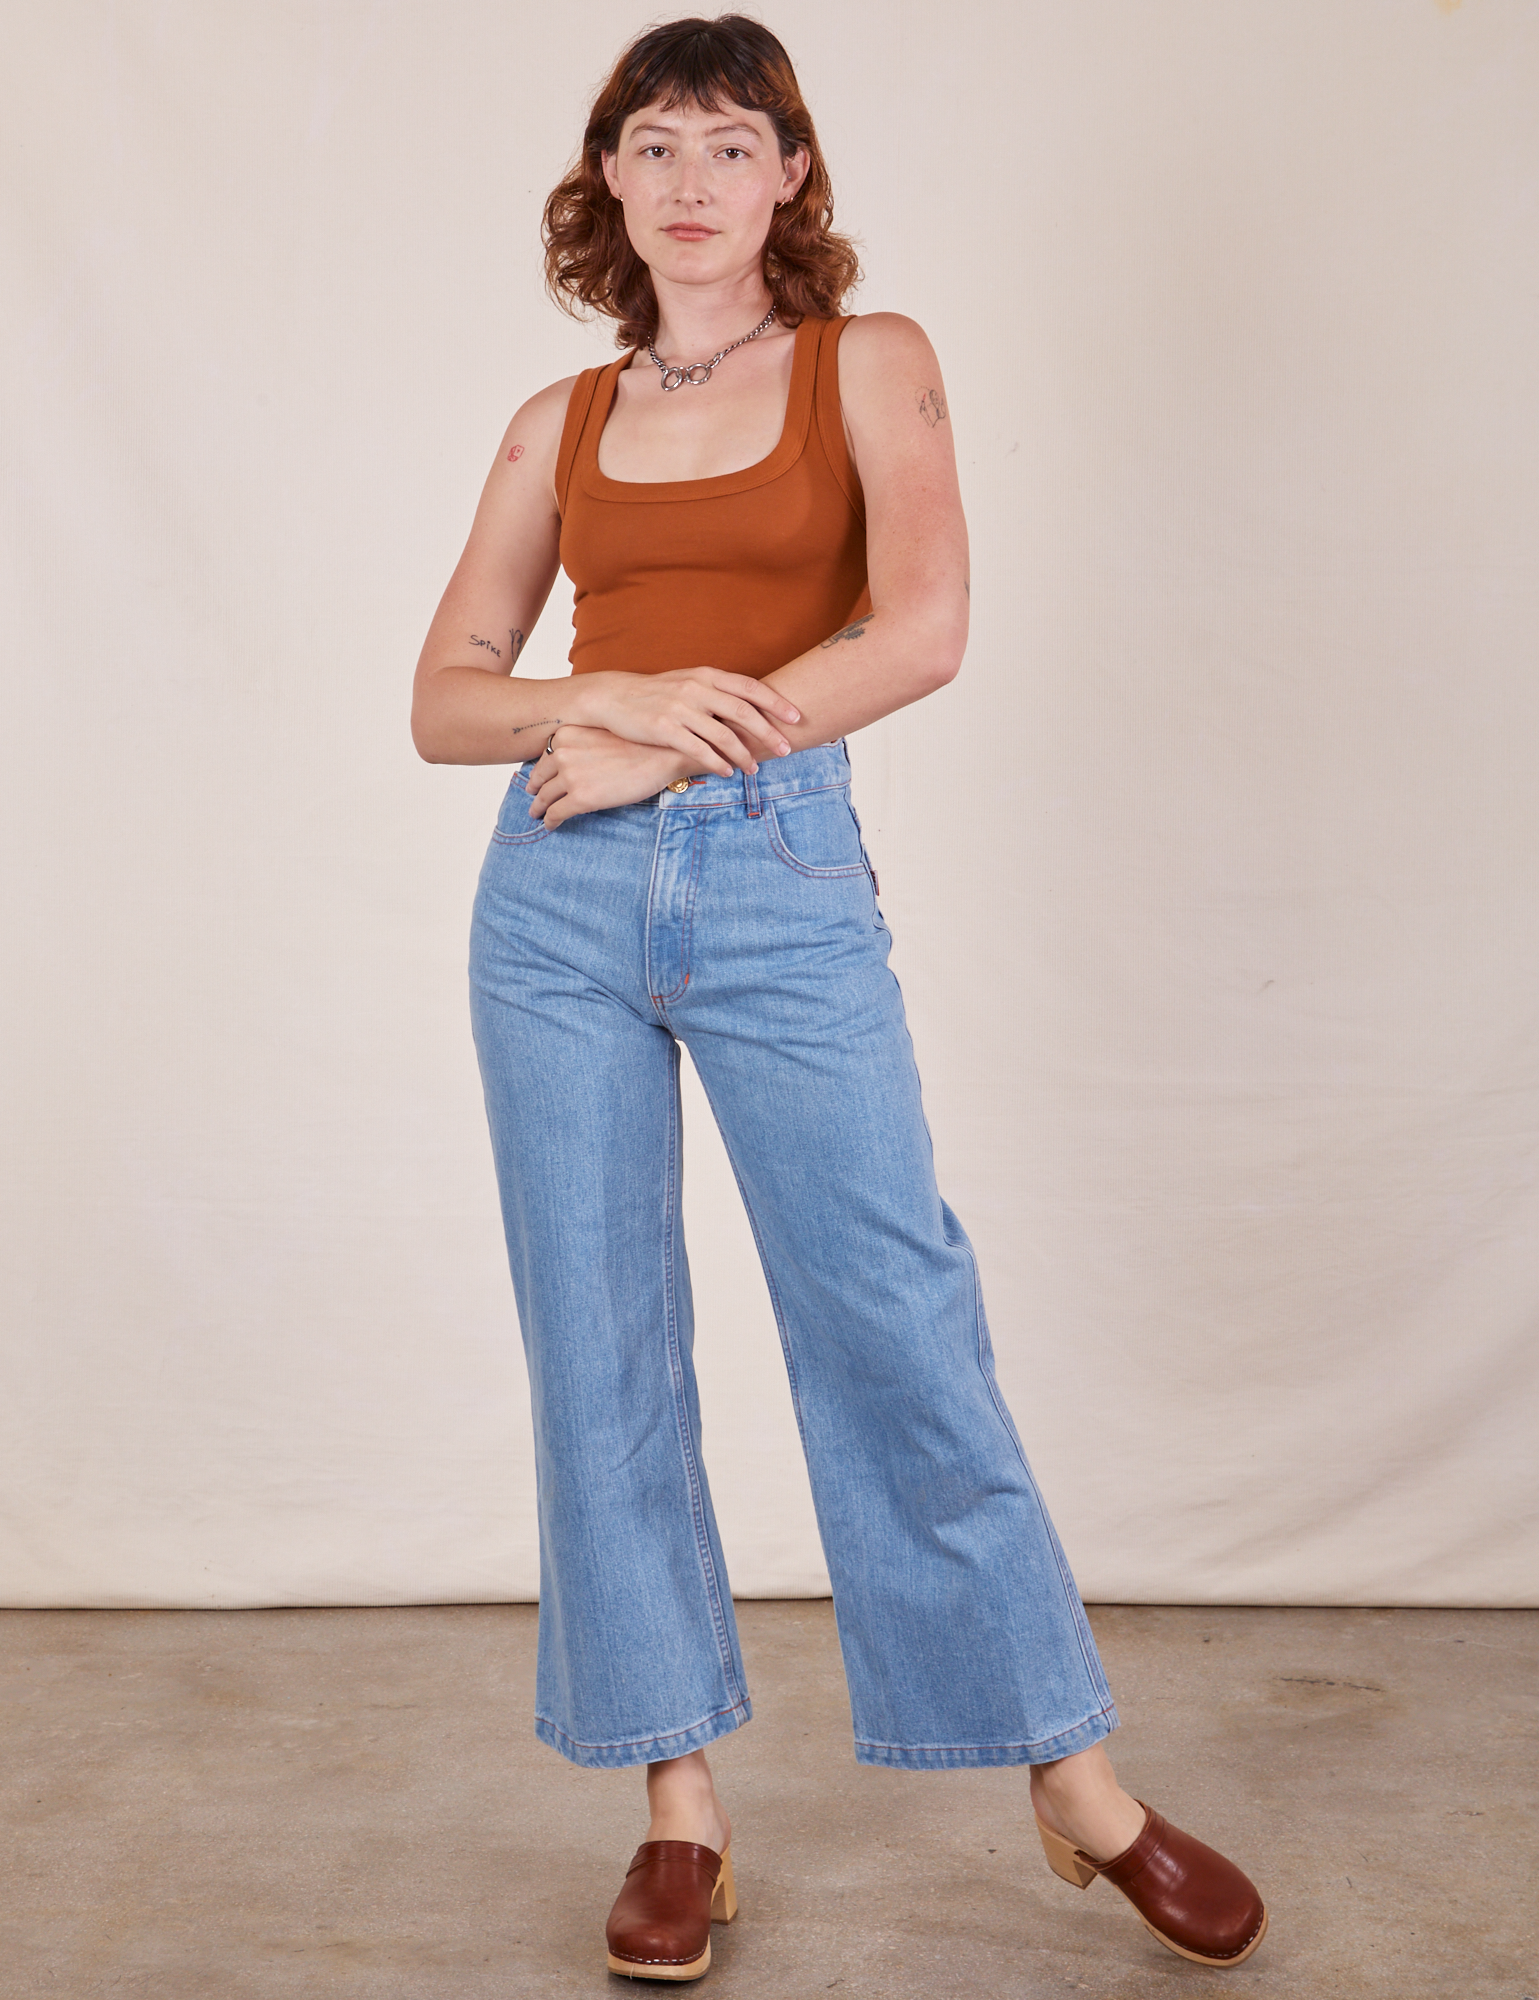 Alex is 5&#39;8&quot; and wearing P Cropped Tank Top in Burnt Terracotta paired with light wash Sailor Jeans